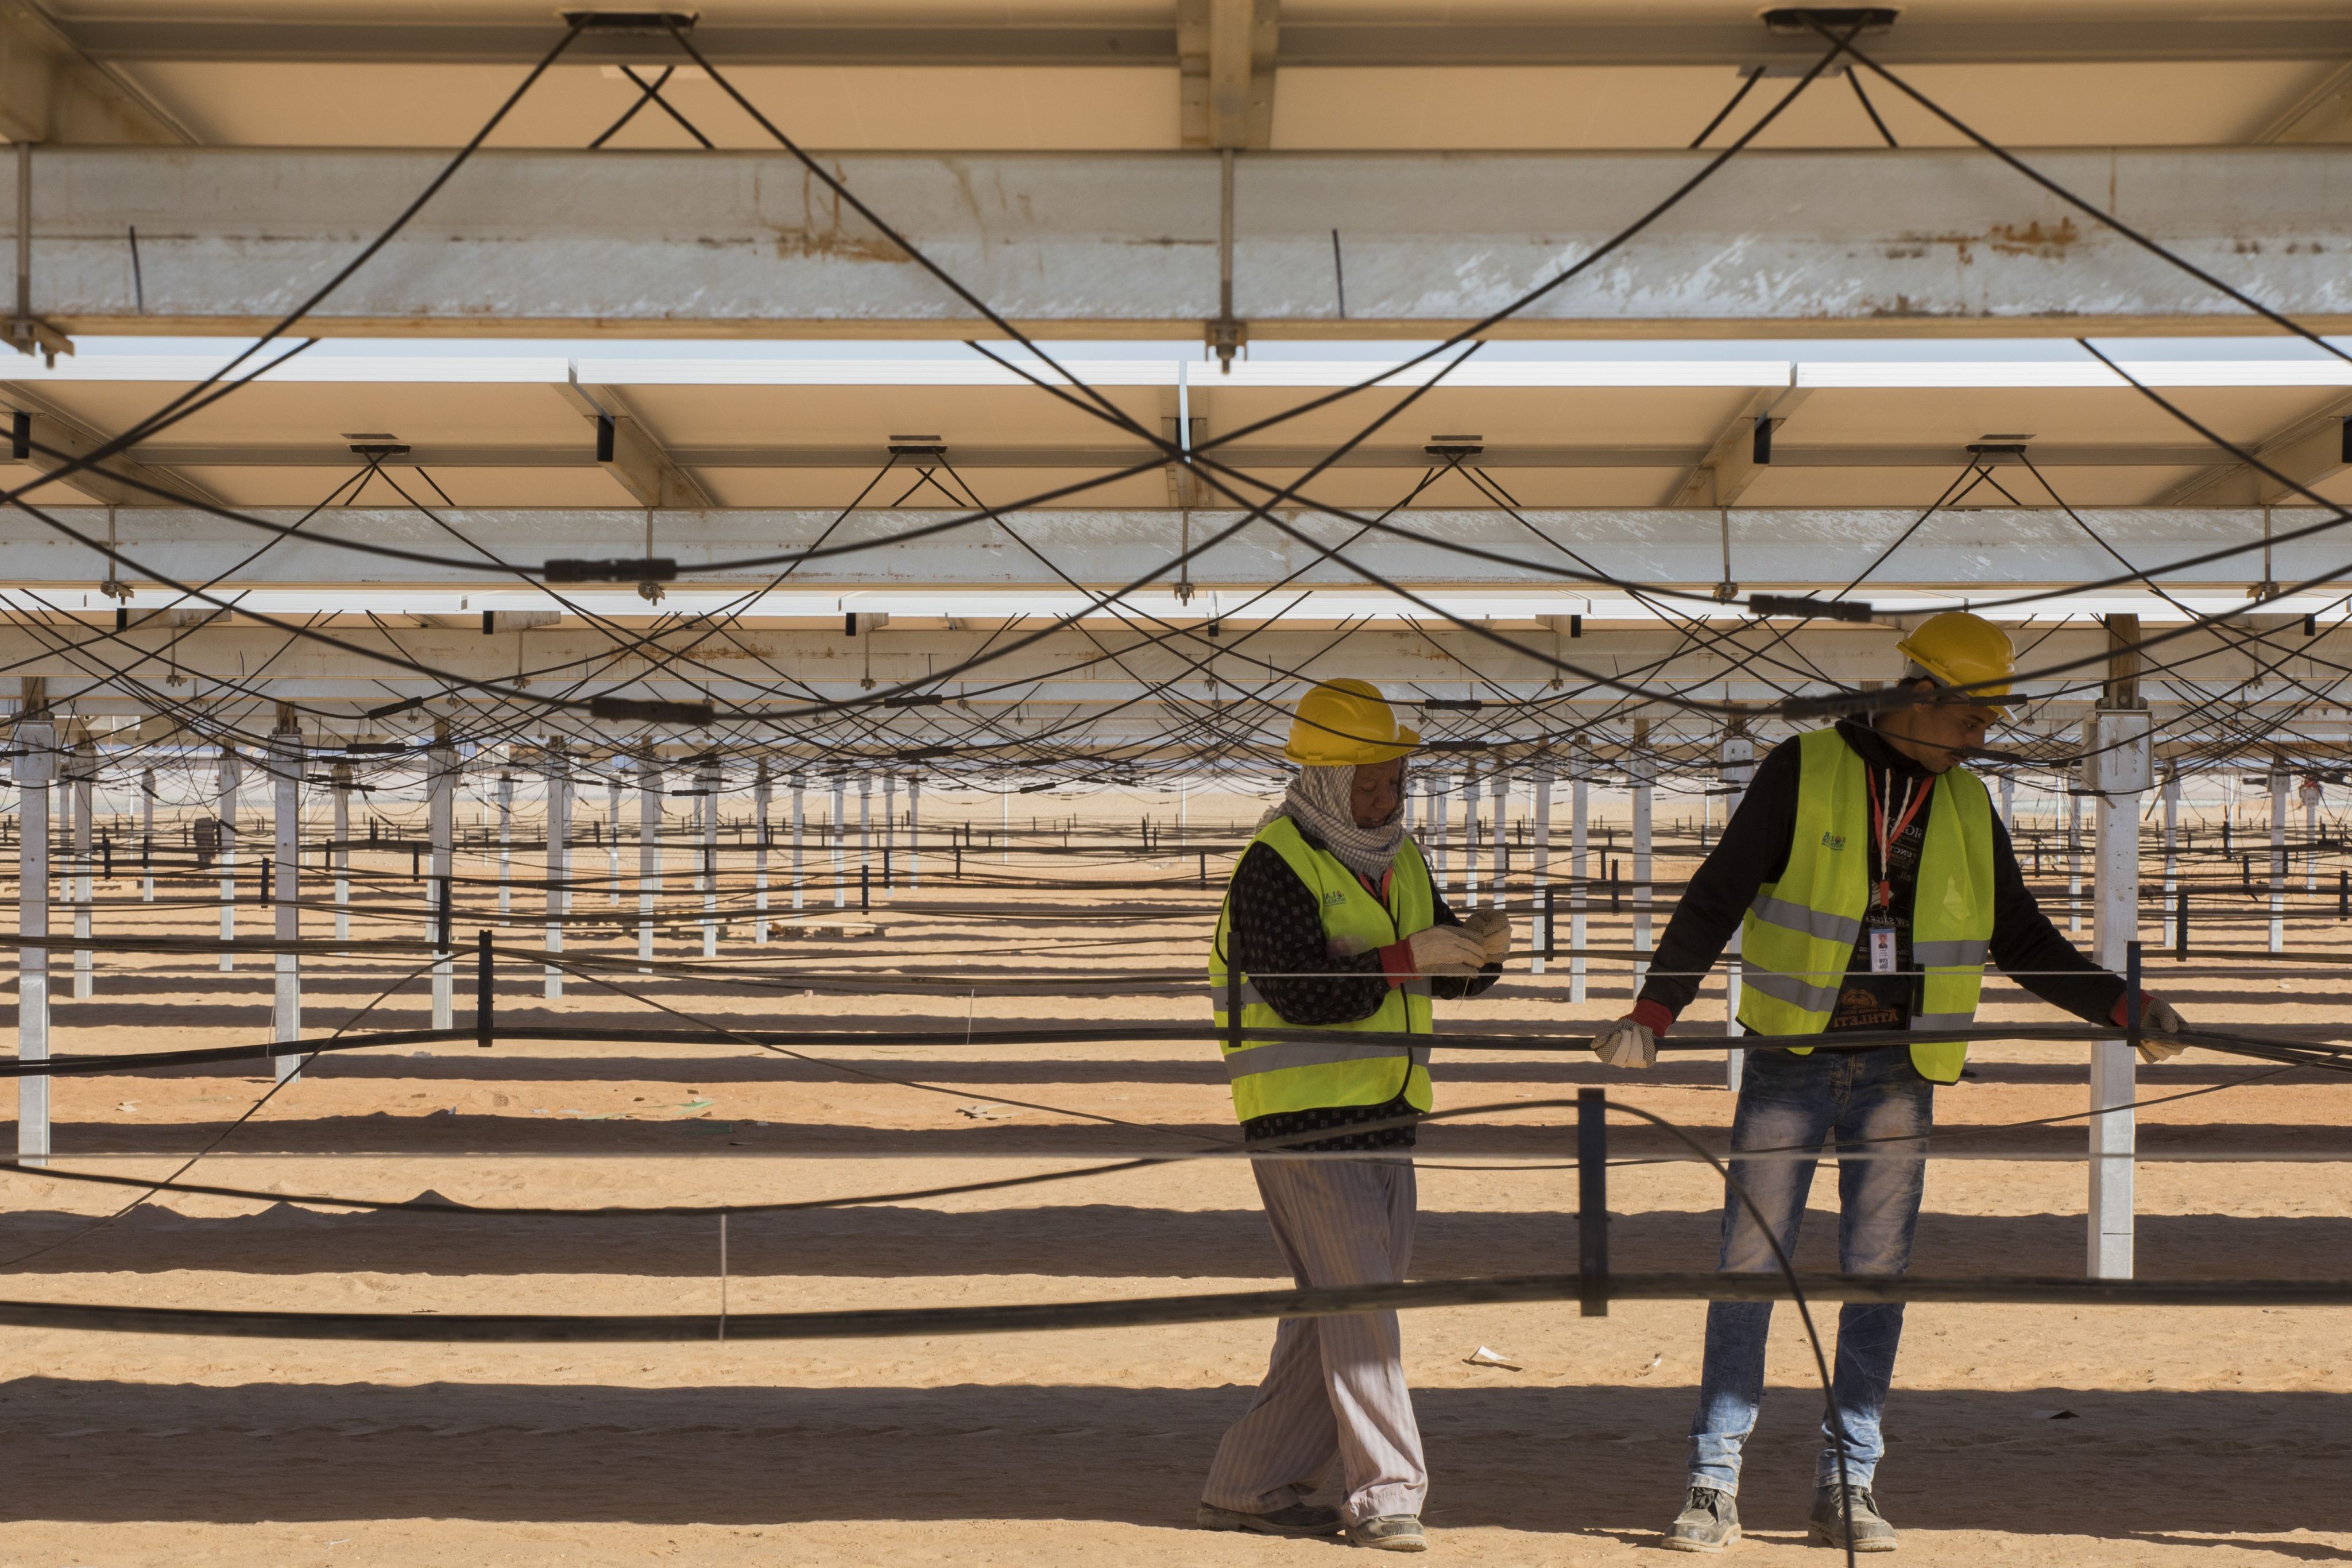 Workers at Benban photovoltaic solar park in Egypt.